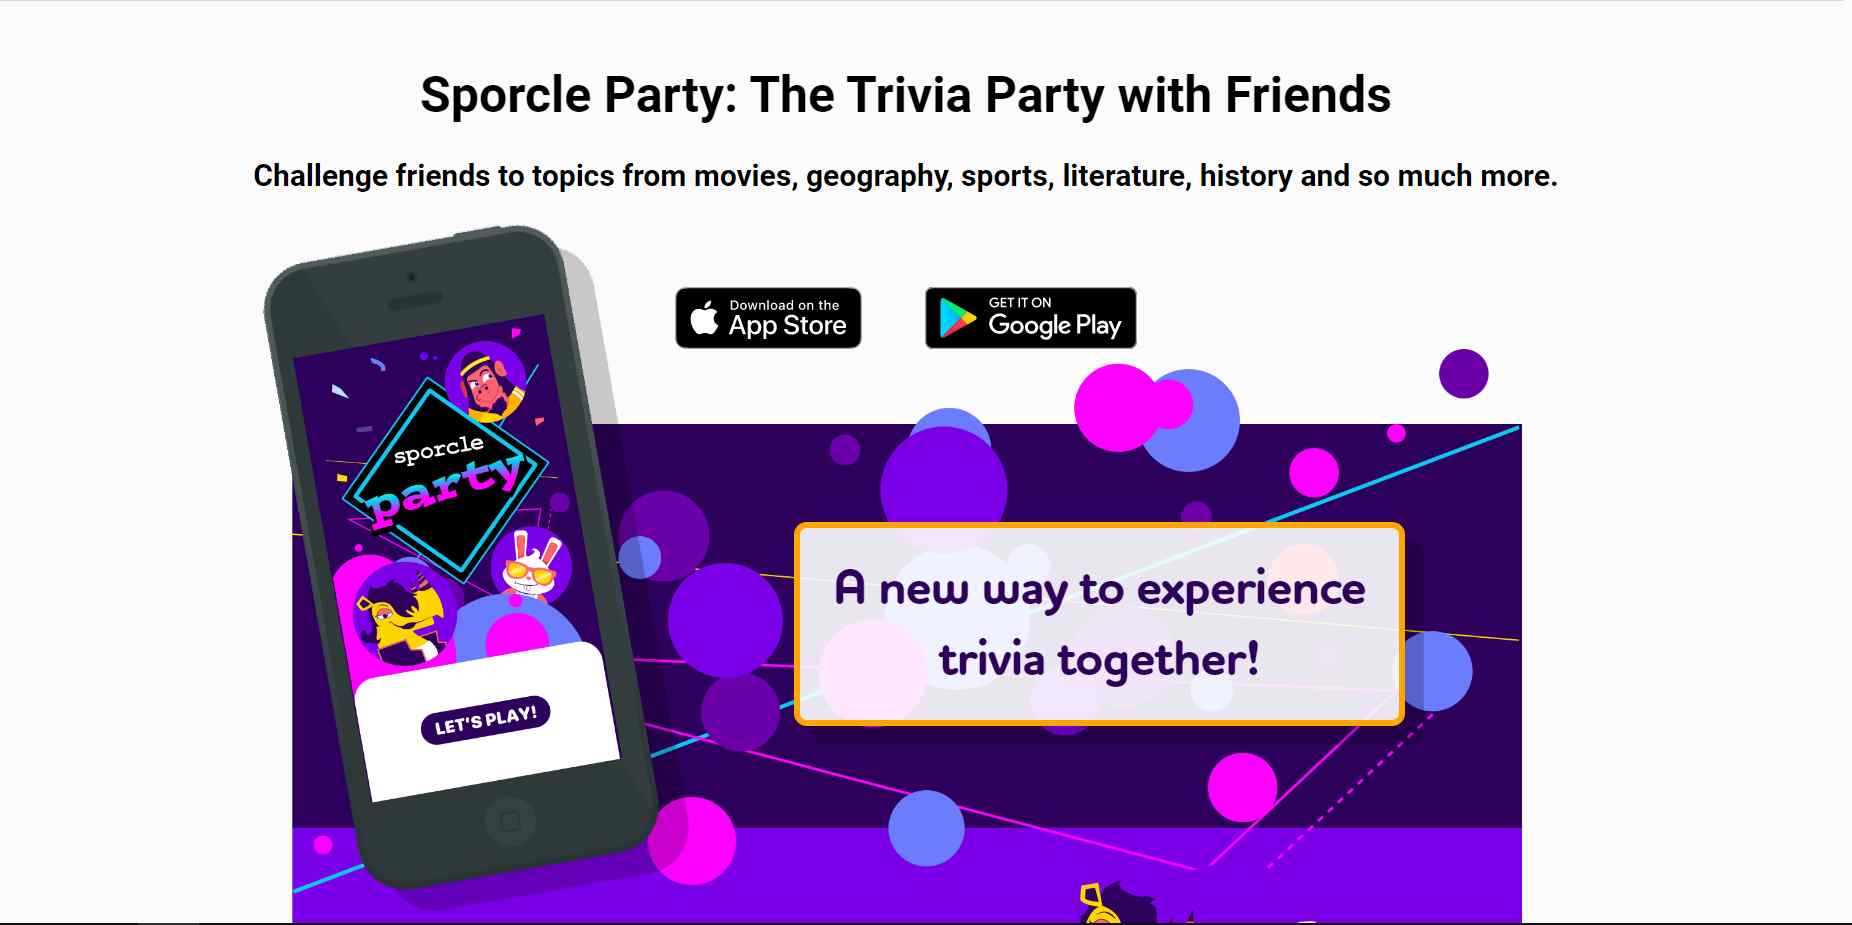 Sporcle Party is a fun and exciting way to play trivia with friends and family at a party.